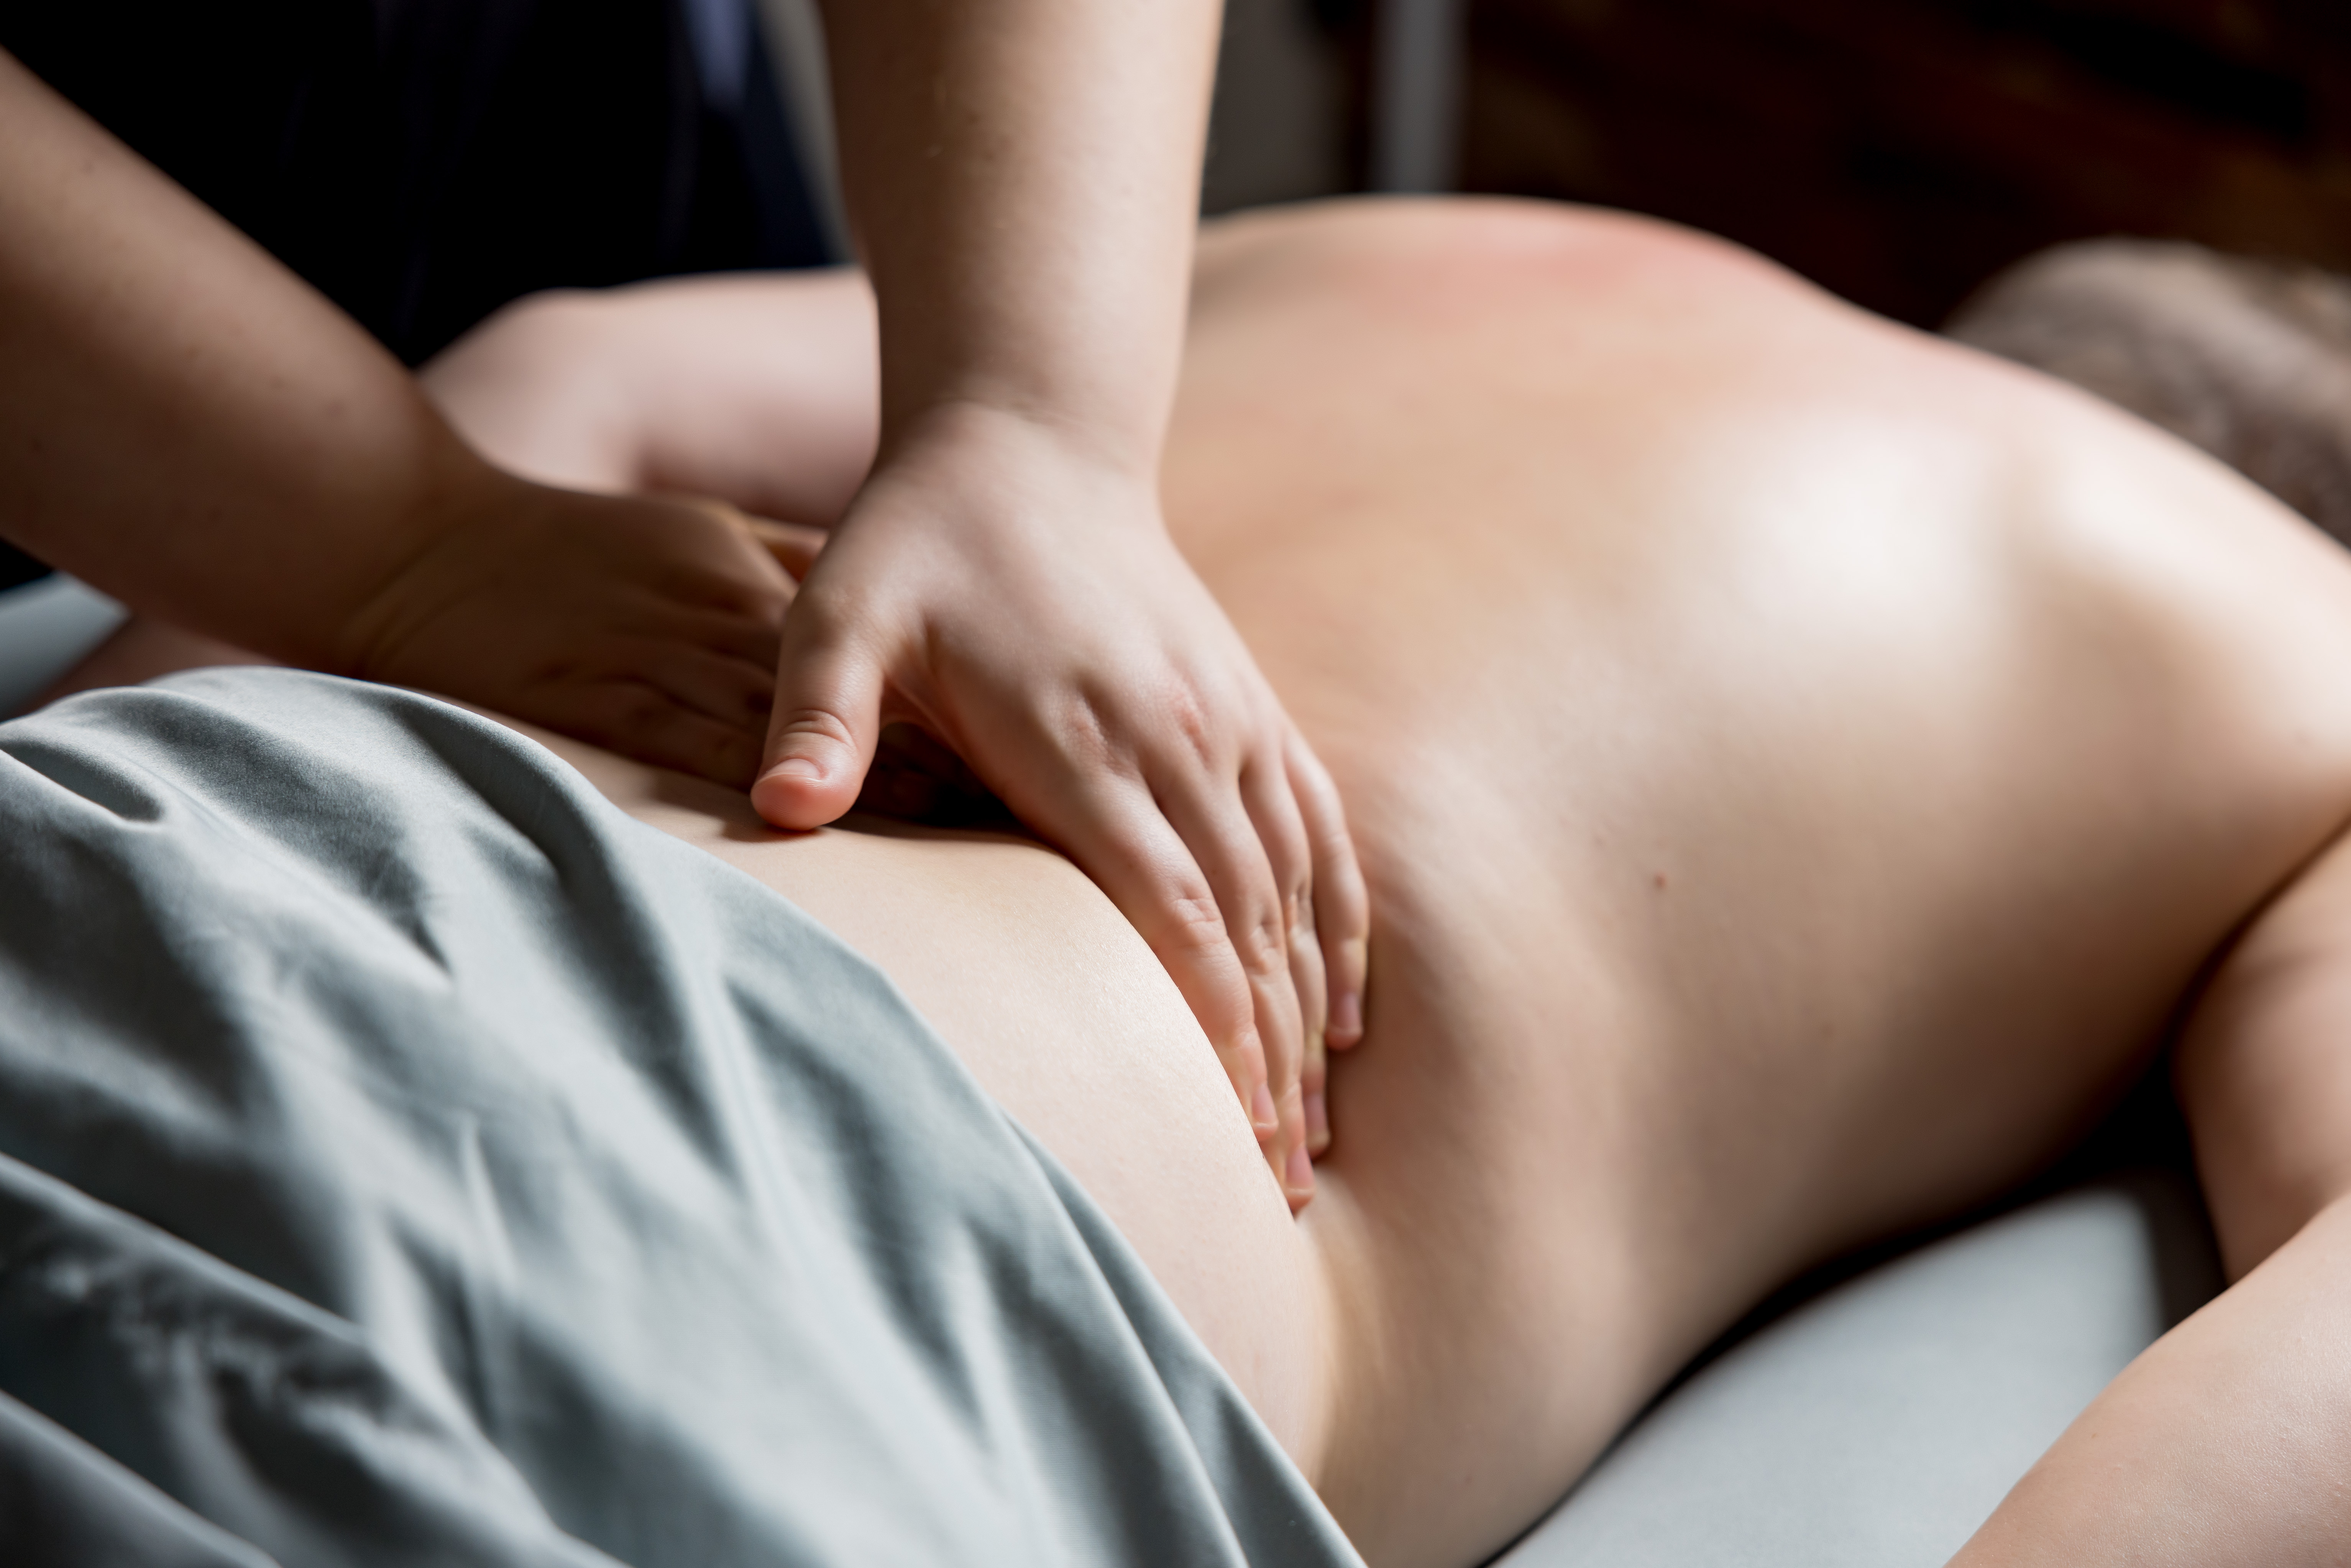 Treatment plans are available at Ease Massage and Manual Therapy.